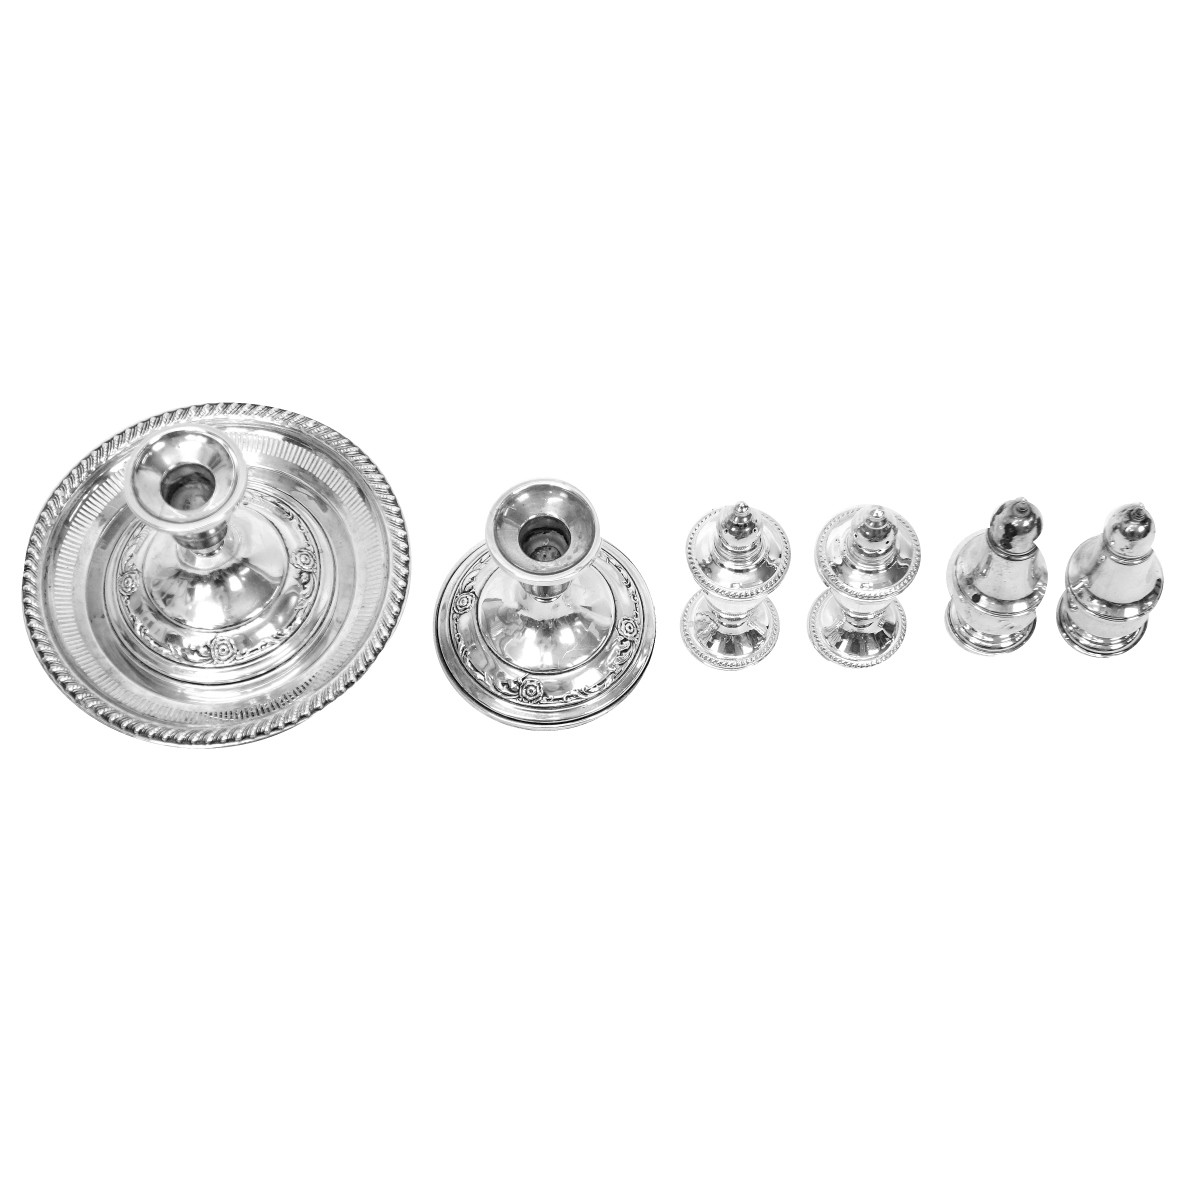 (7) Weighted Sterling Silver Tableware